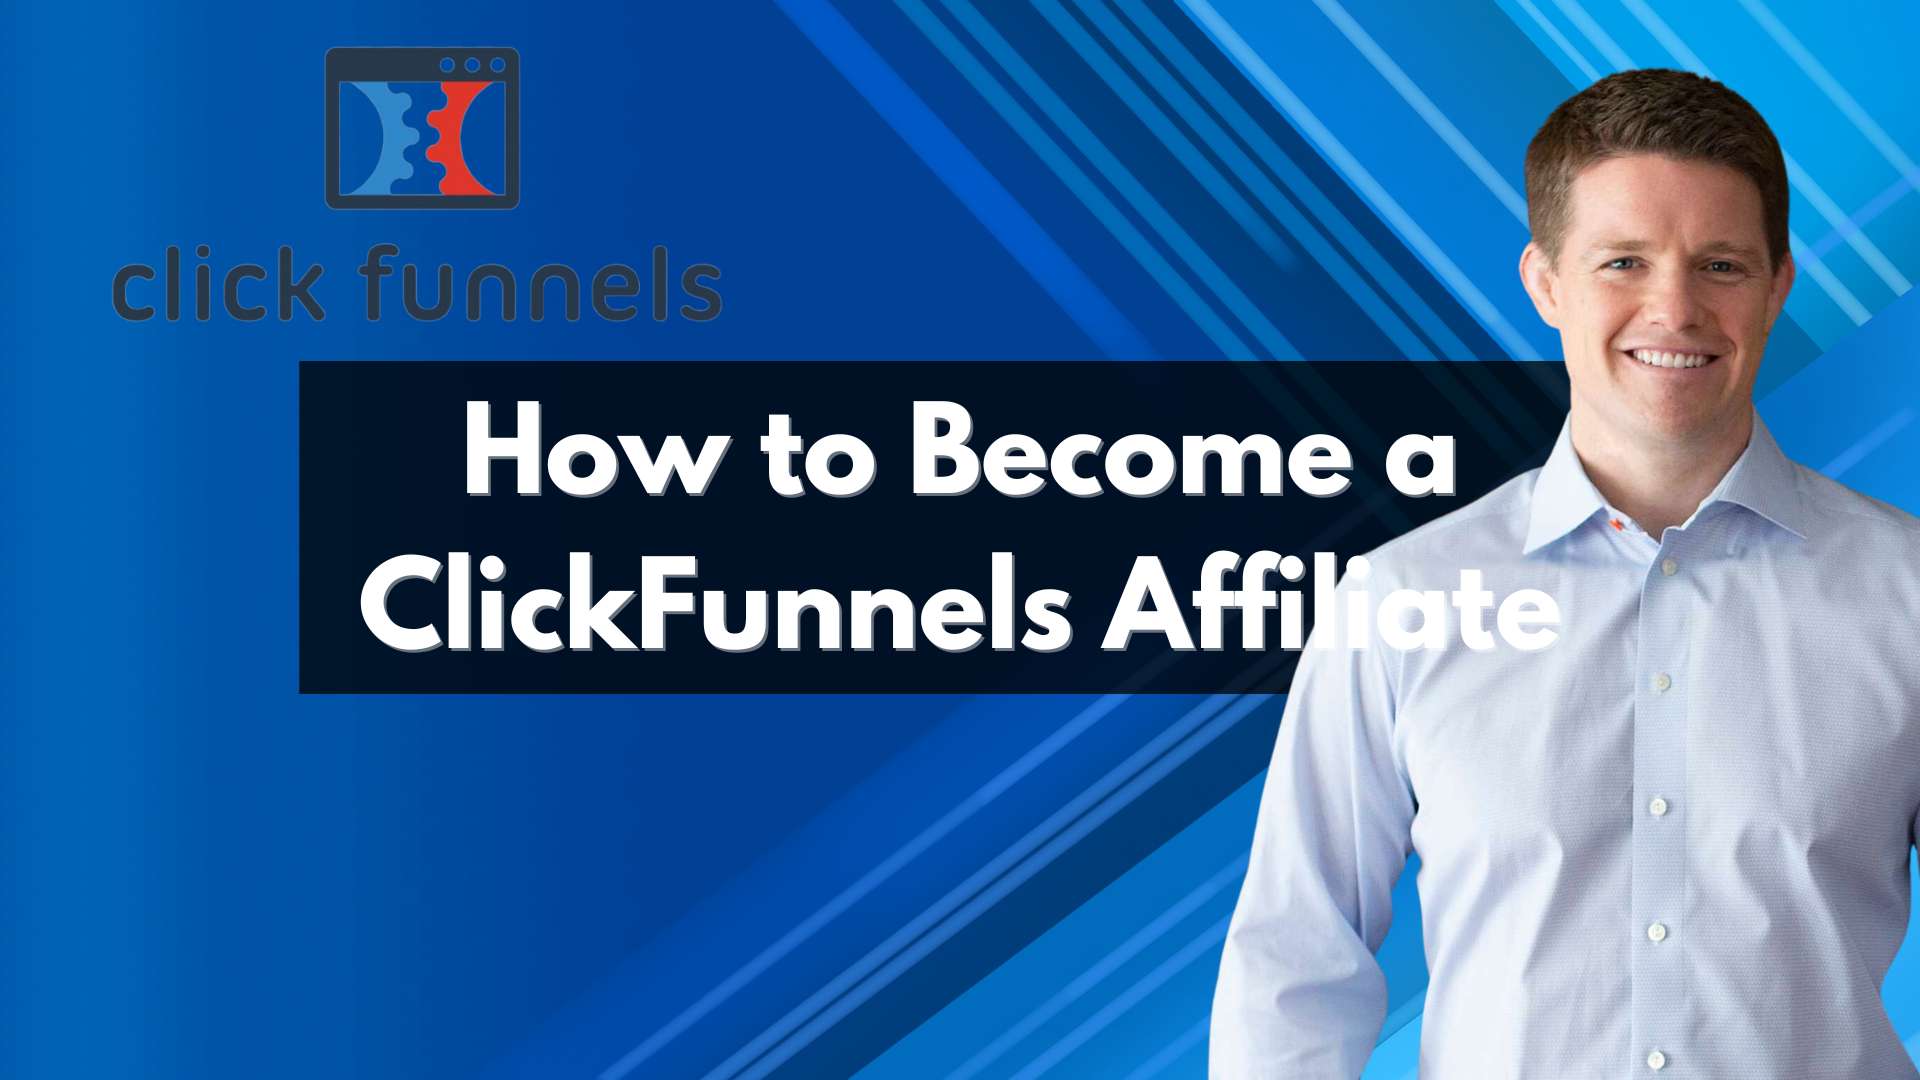 How to become a clickfunnels affiliate